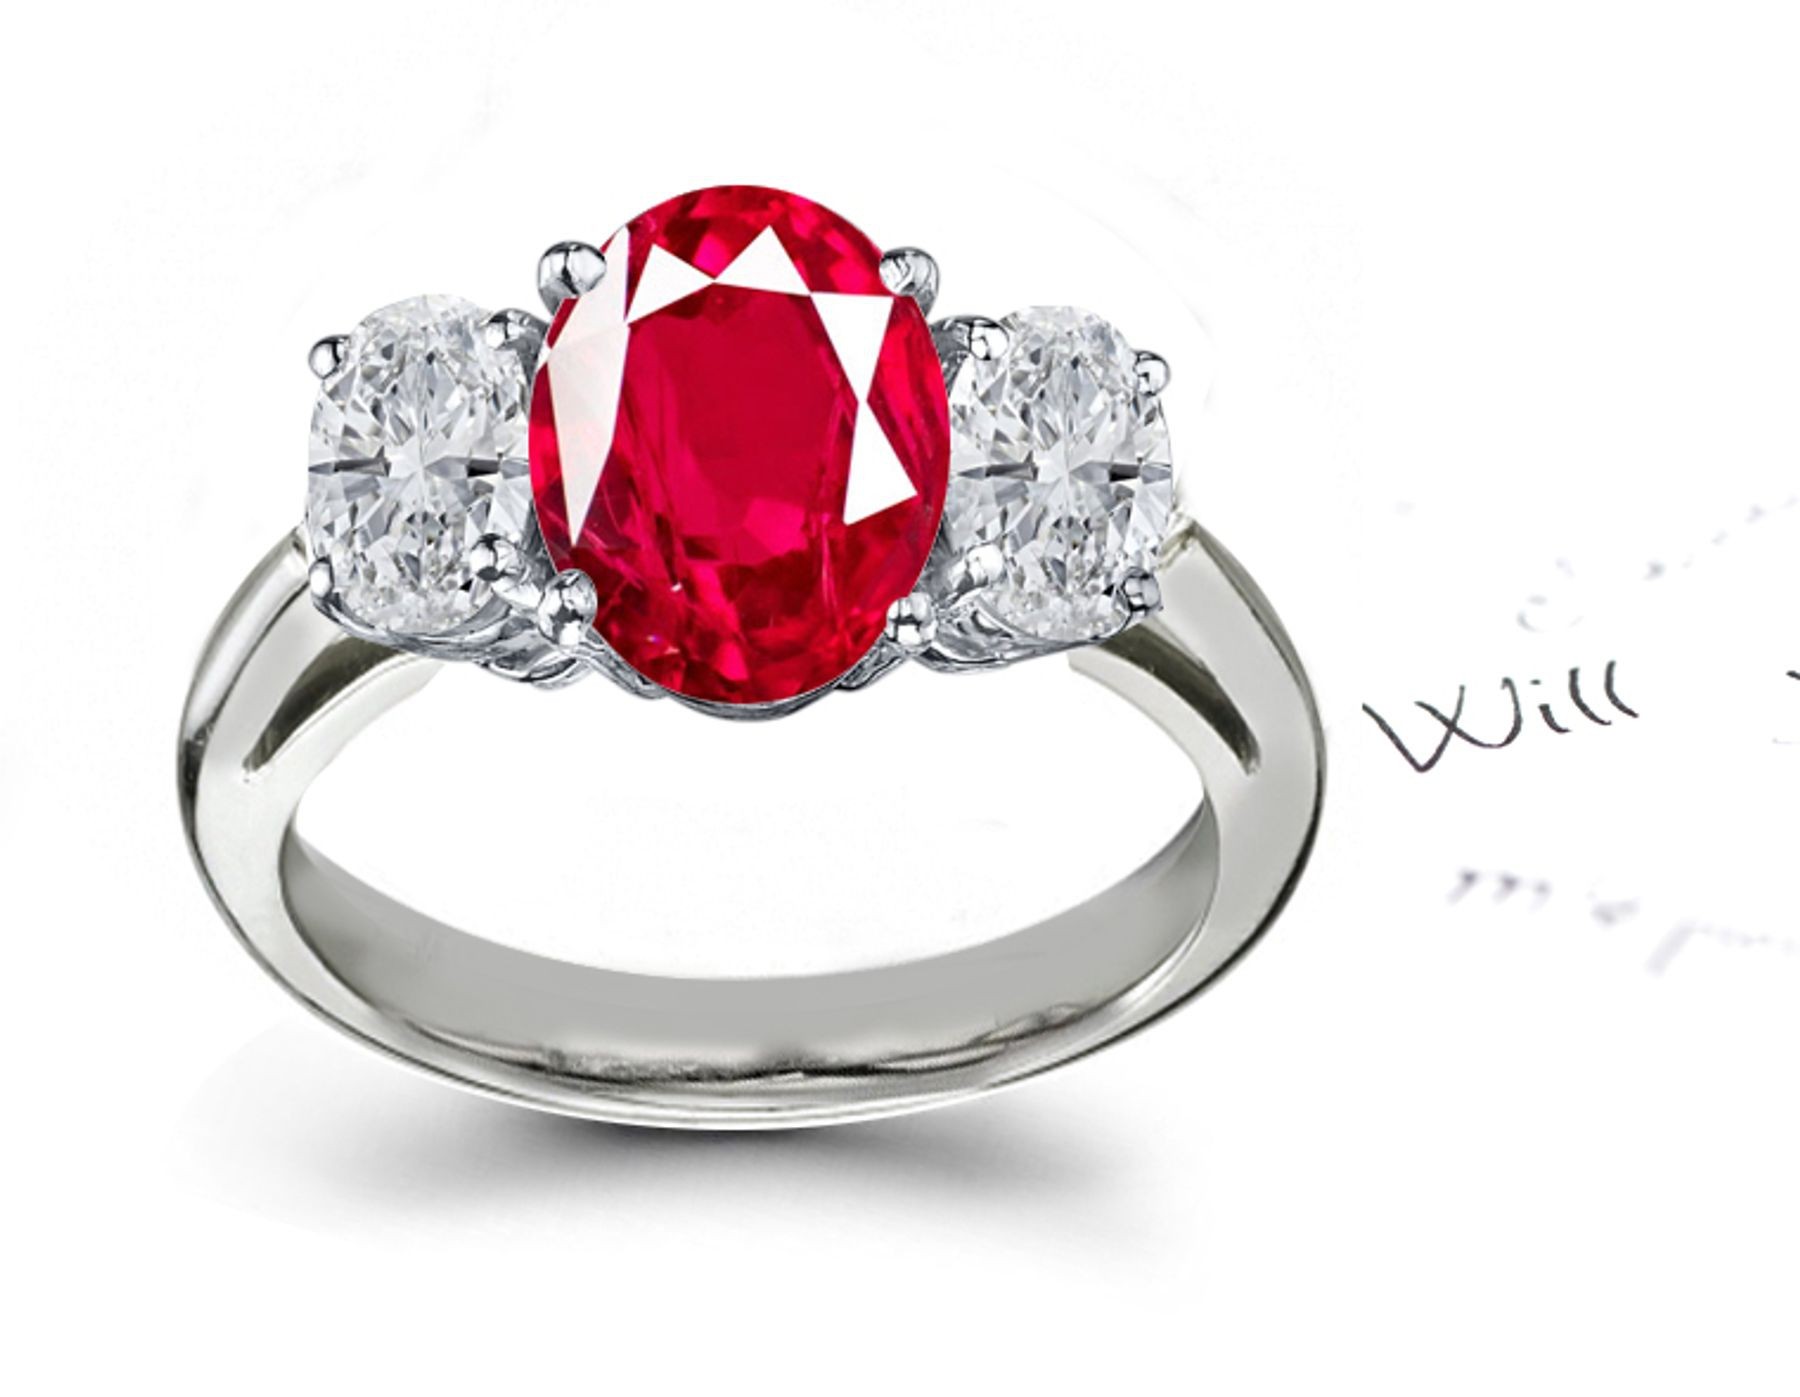 Siam Red Ruby Diamond Engagement Rings: Platinum engagement ring with oval ruby and sumptuous two round brilliant diamonds.